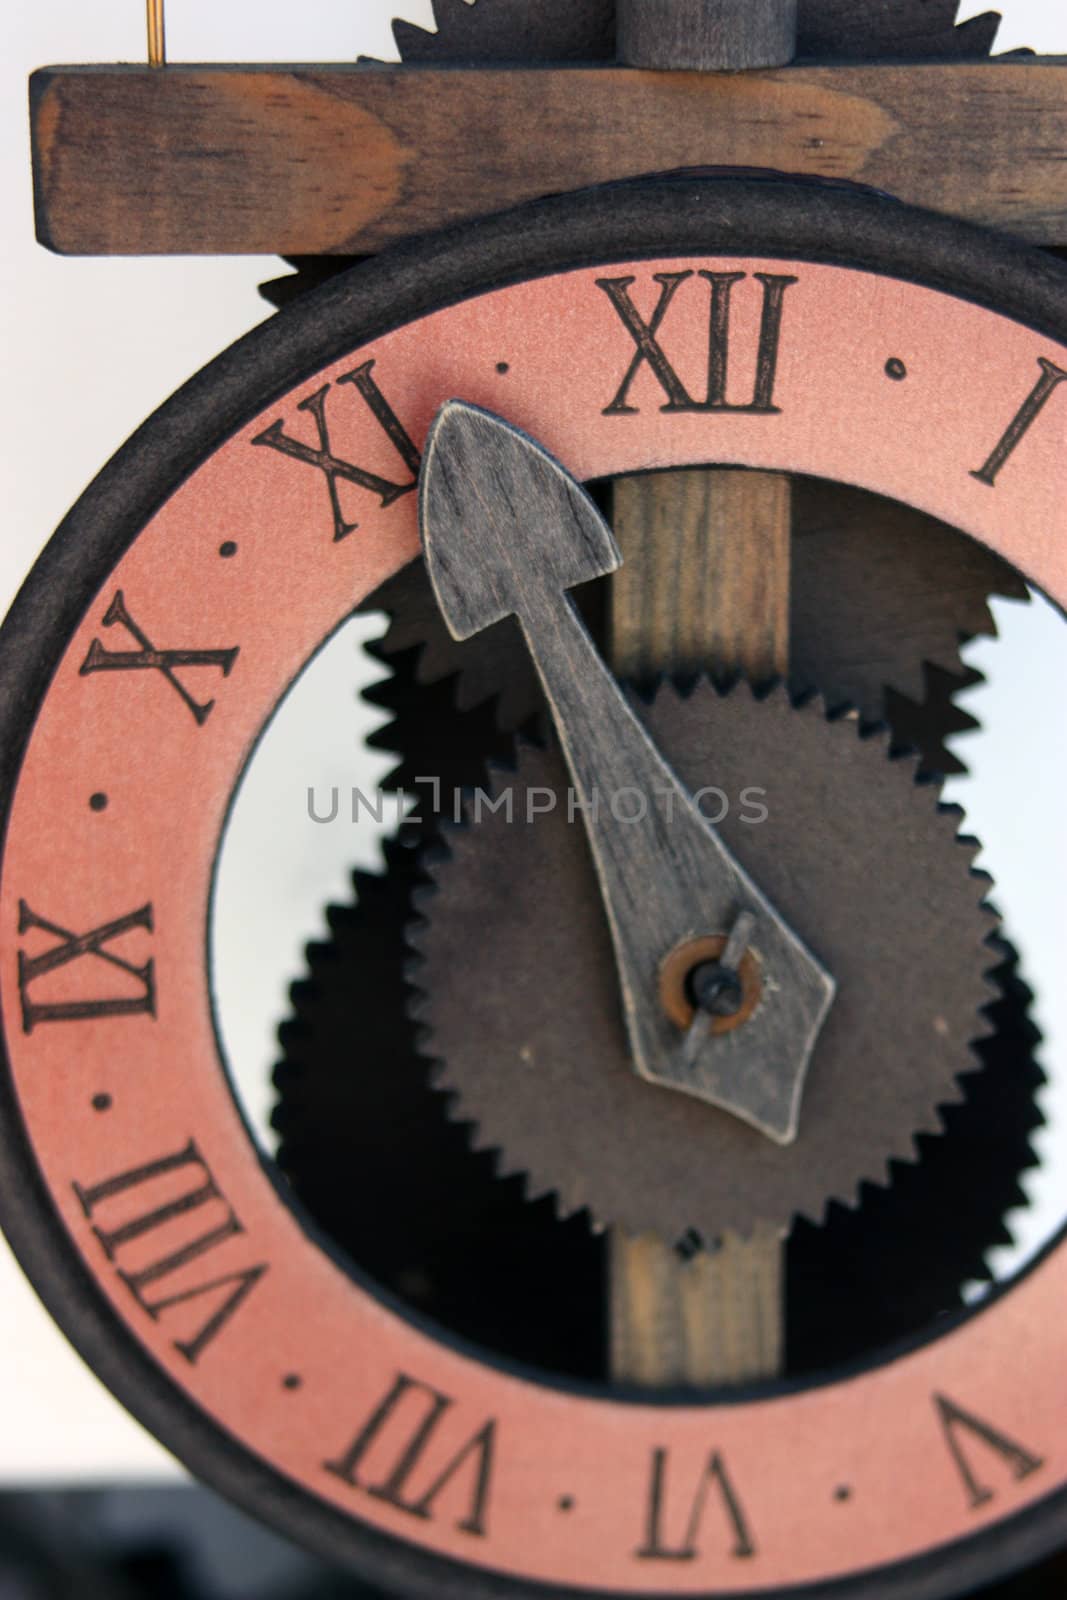 Imitation antique wall clock with arrows and numbers.